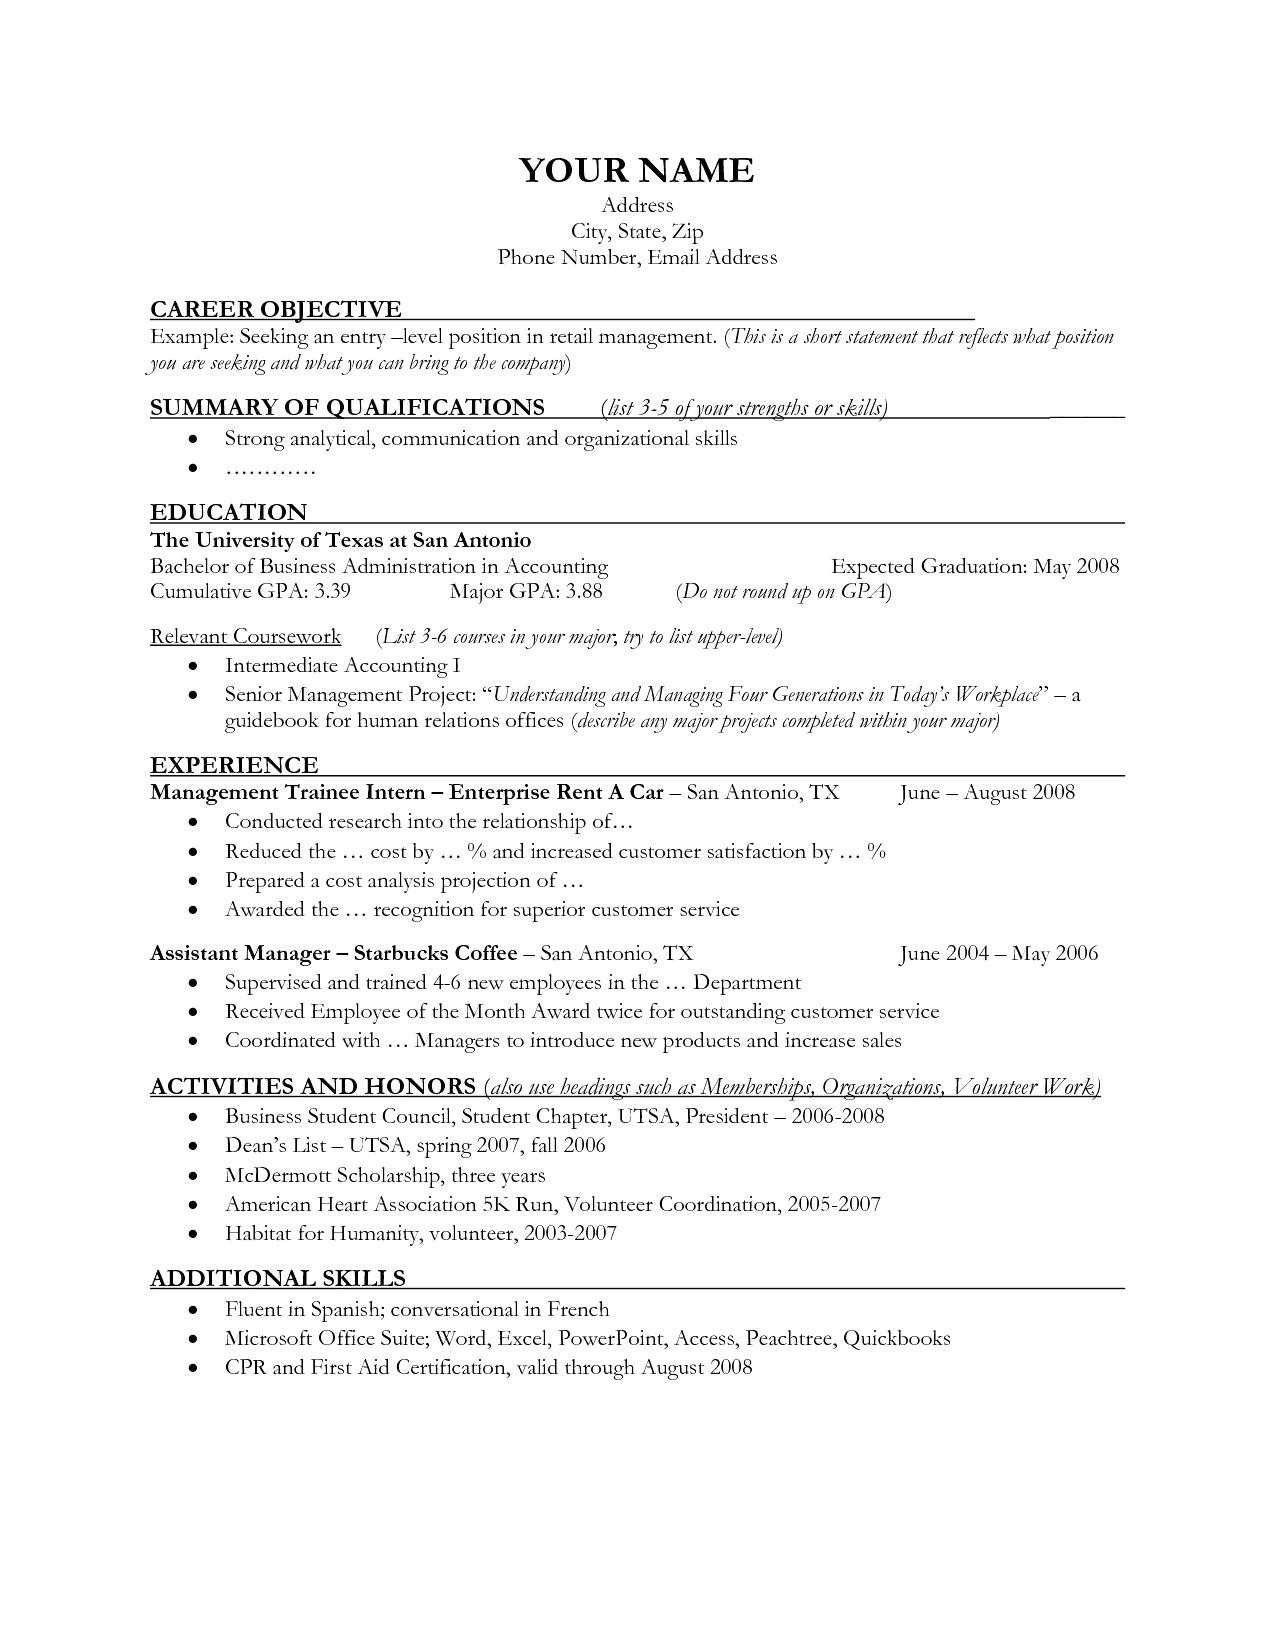 Sample Resume Objectives for Entry Level Retail 77 New Photos Of Good Resume Objectives for Retail Jobs Check More …